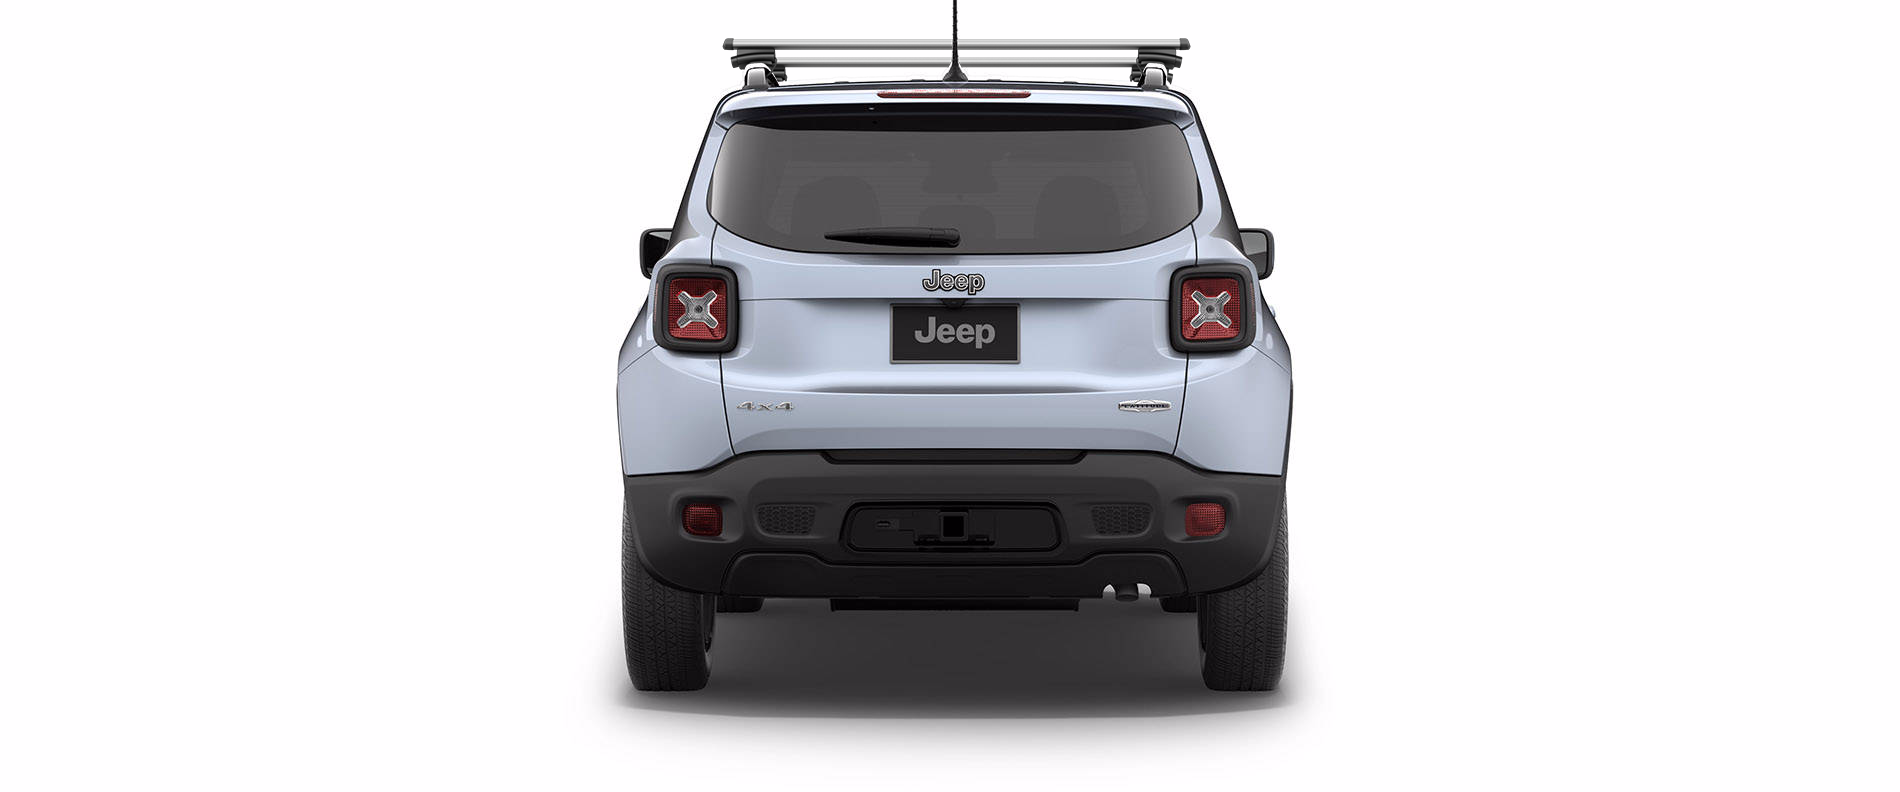 Jeep Renegade Limited 4x4 rear view